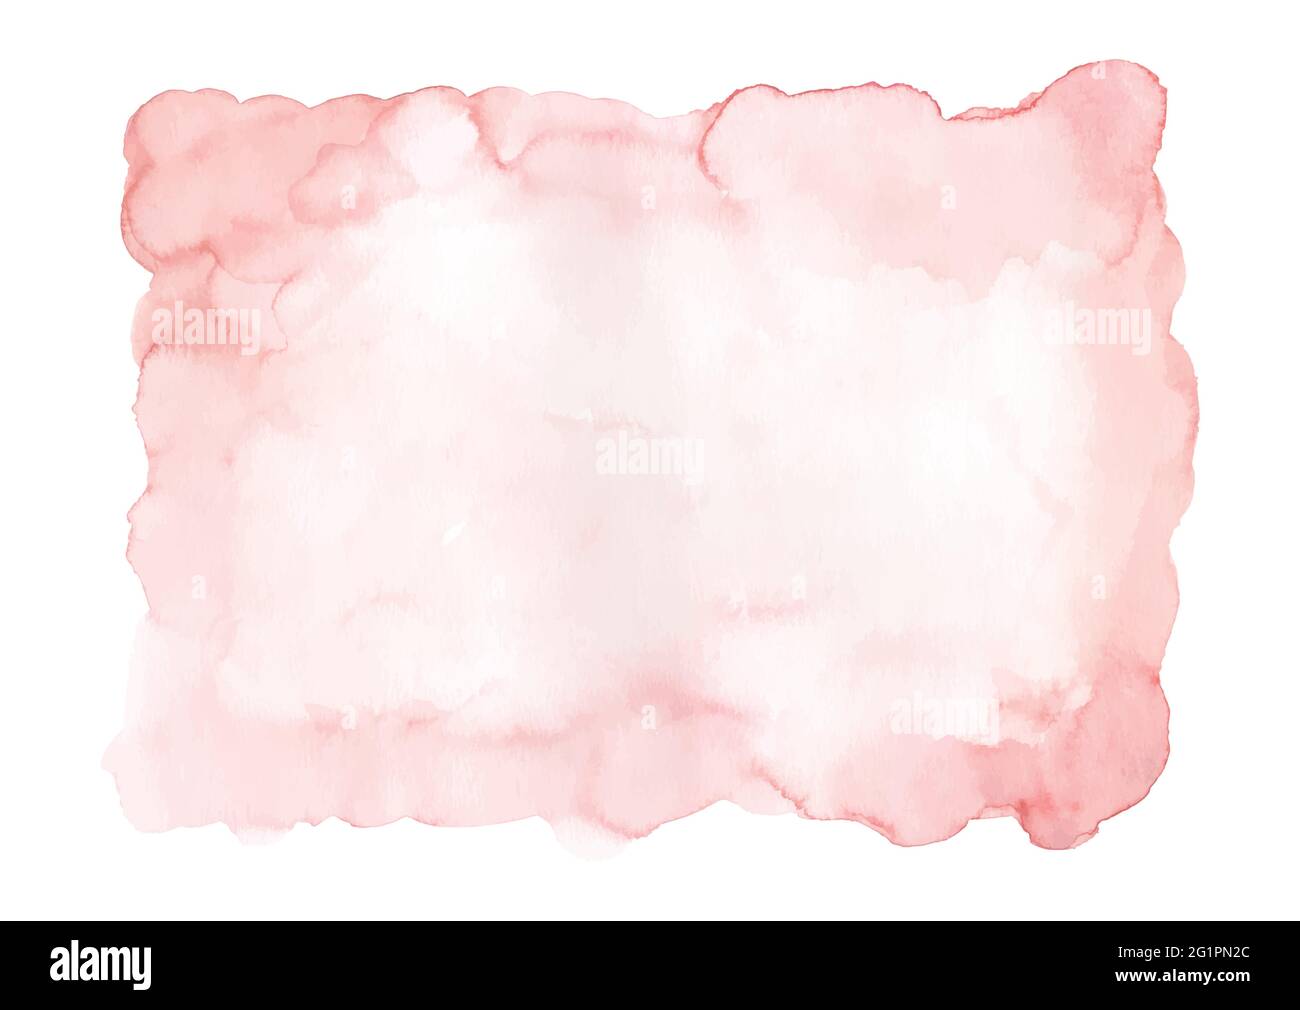 Soft pink watercolor background. Abstract stain watercolor hand-painted use for decorative design of wall art, poster, card, cover or banner. Stock Vector